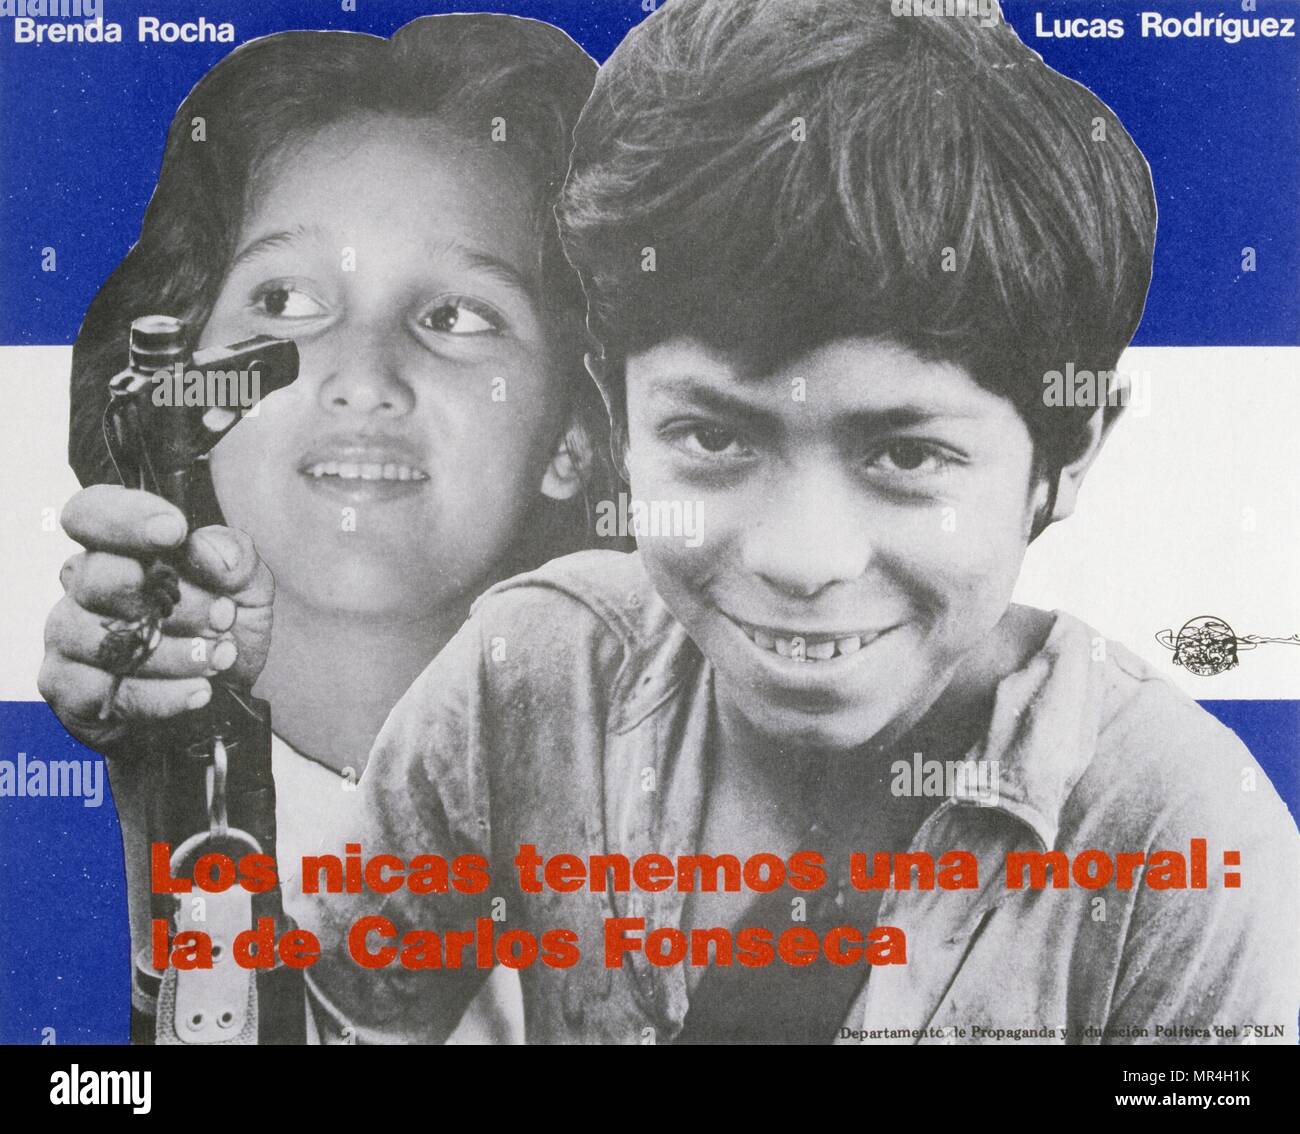 Sandinista National Liberation Front (FSLN) propaganda poster in Nicaragua. The party was named after Augusto Caesar Sandino, who led the Nicaraguan resistance against the United States occupation of Nicaragua in the 1930s. The FSLN overthrew Anastasio Somoza in 1979, ending the Somoza dynasty, and established a revolutionary government in its place. Following their seizure of power, the Sandinistas ruled Nicaragua from 1979 to 1990, first as part of a Junta of National Reconstruction. Stock Photo